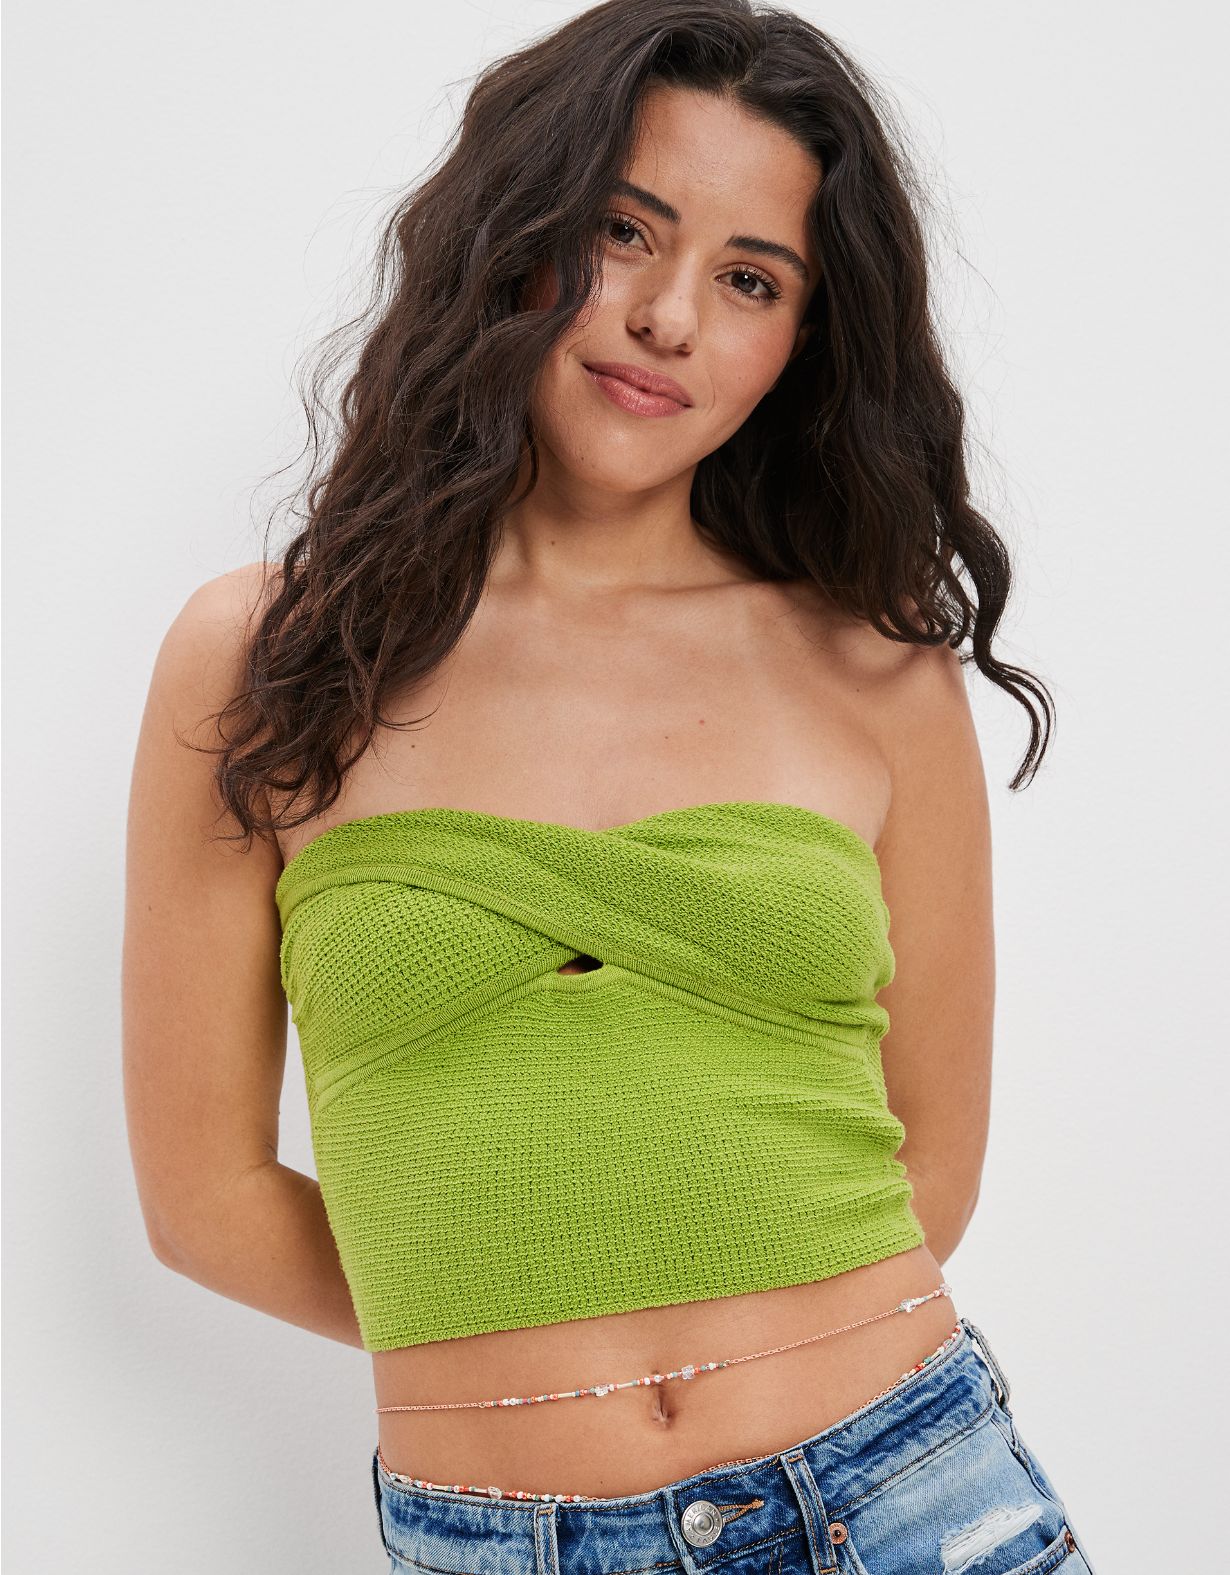 AE Cropped Sweater Knit Twist Tube Top